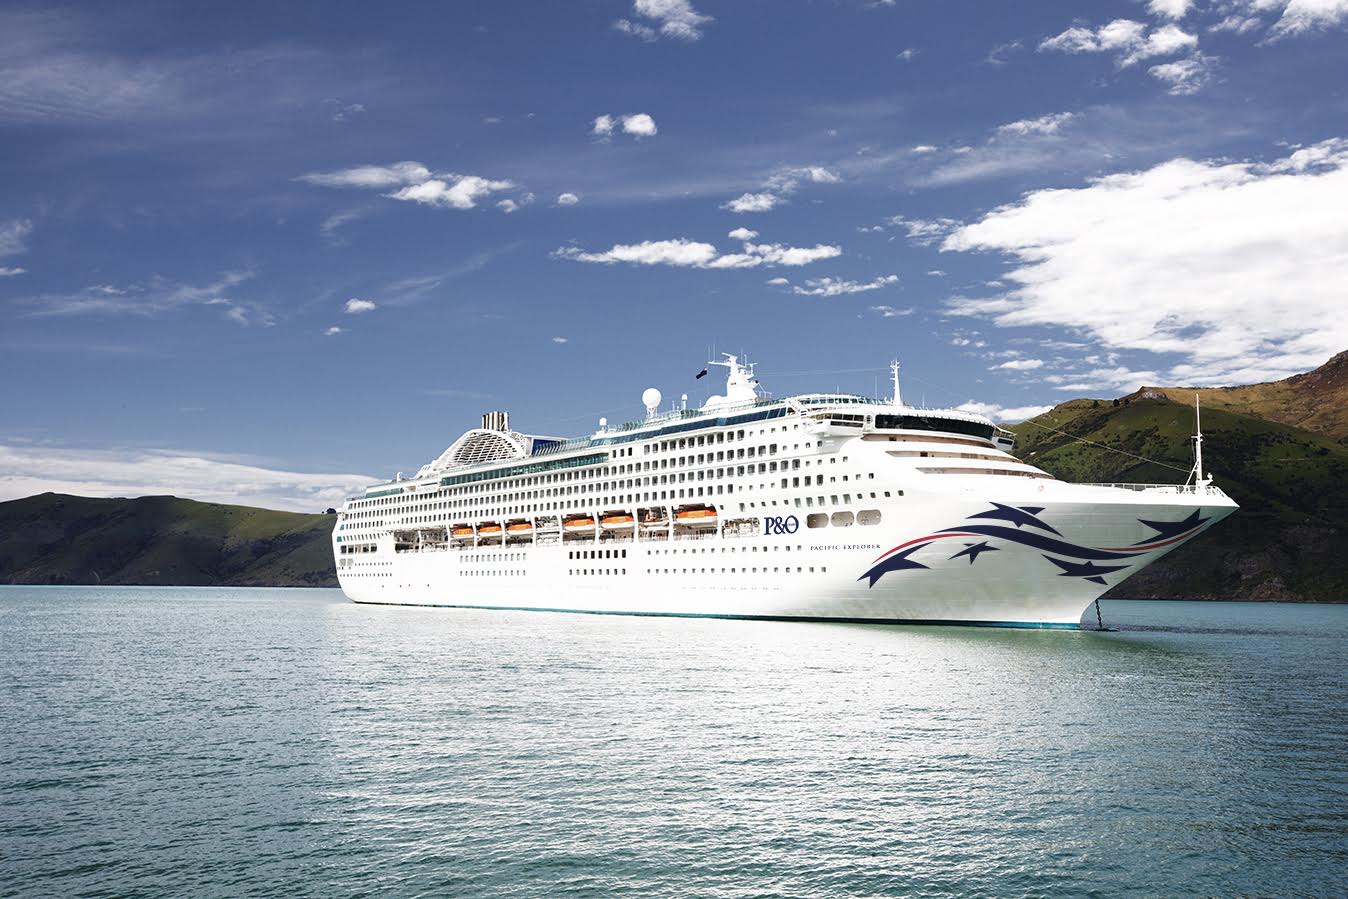 P&O's Explorer will bear the Southern Cross on her bow